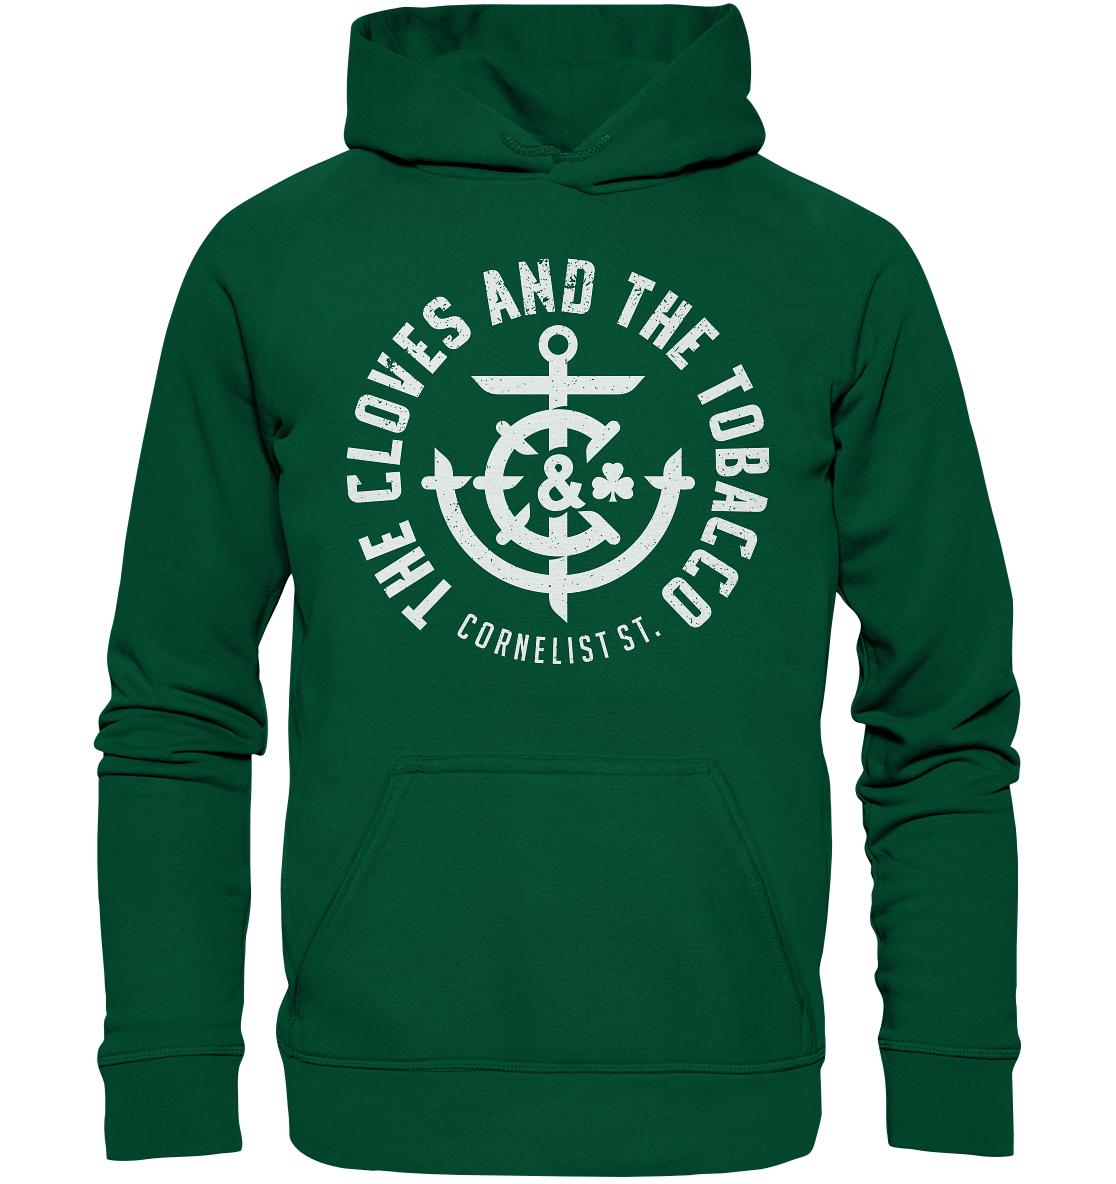 The Cloves And The Tobacco "Cornelist St." - Basic Unisex Hoodie